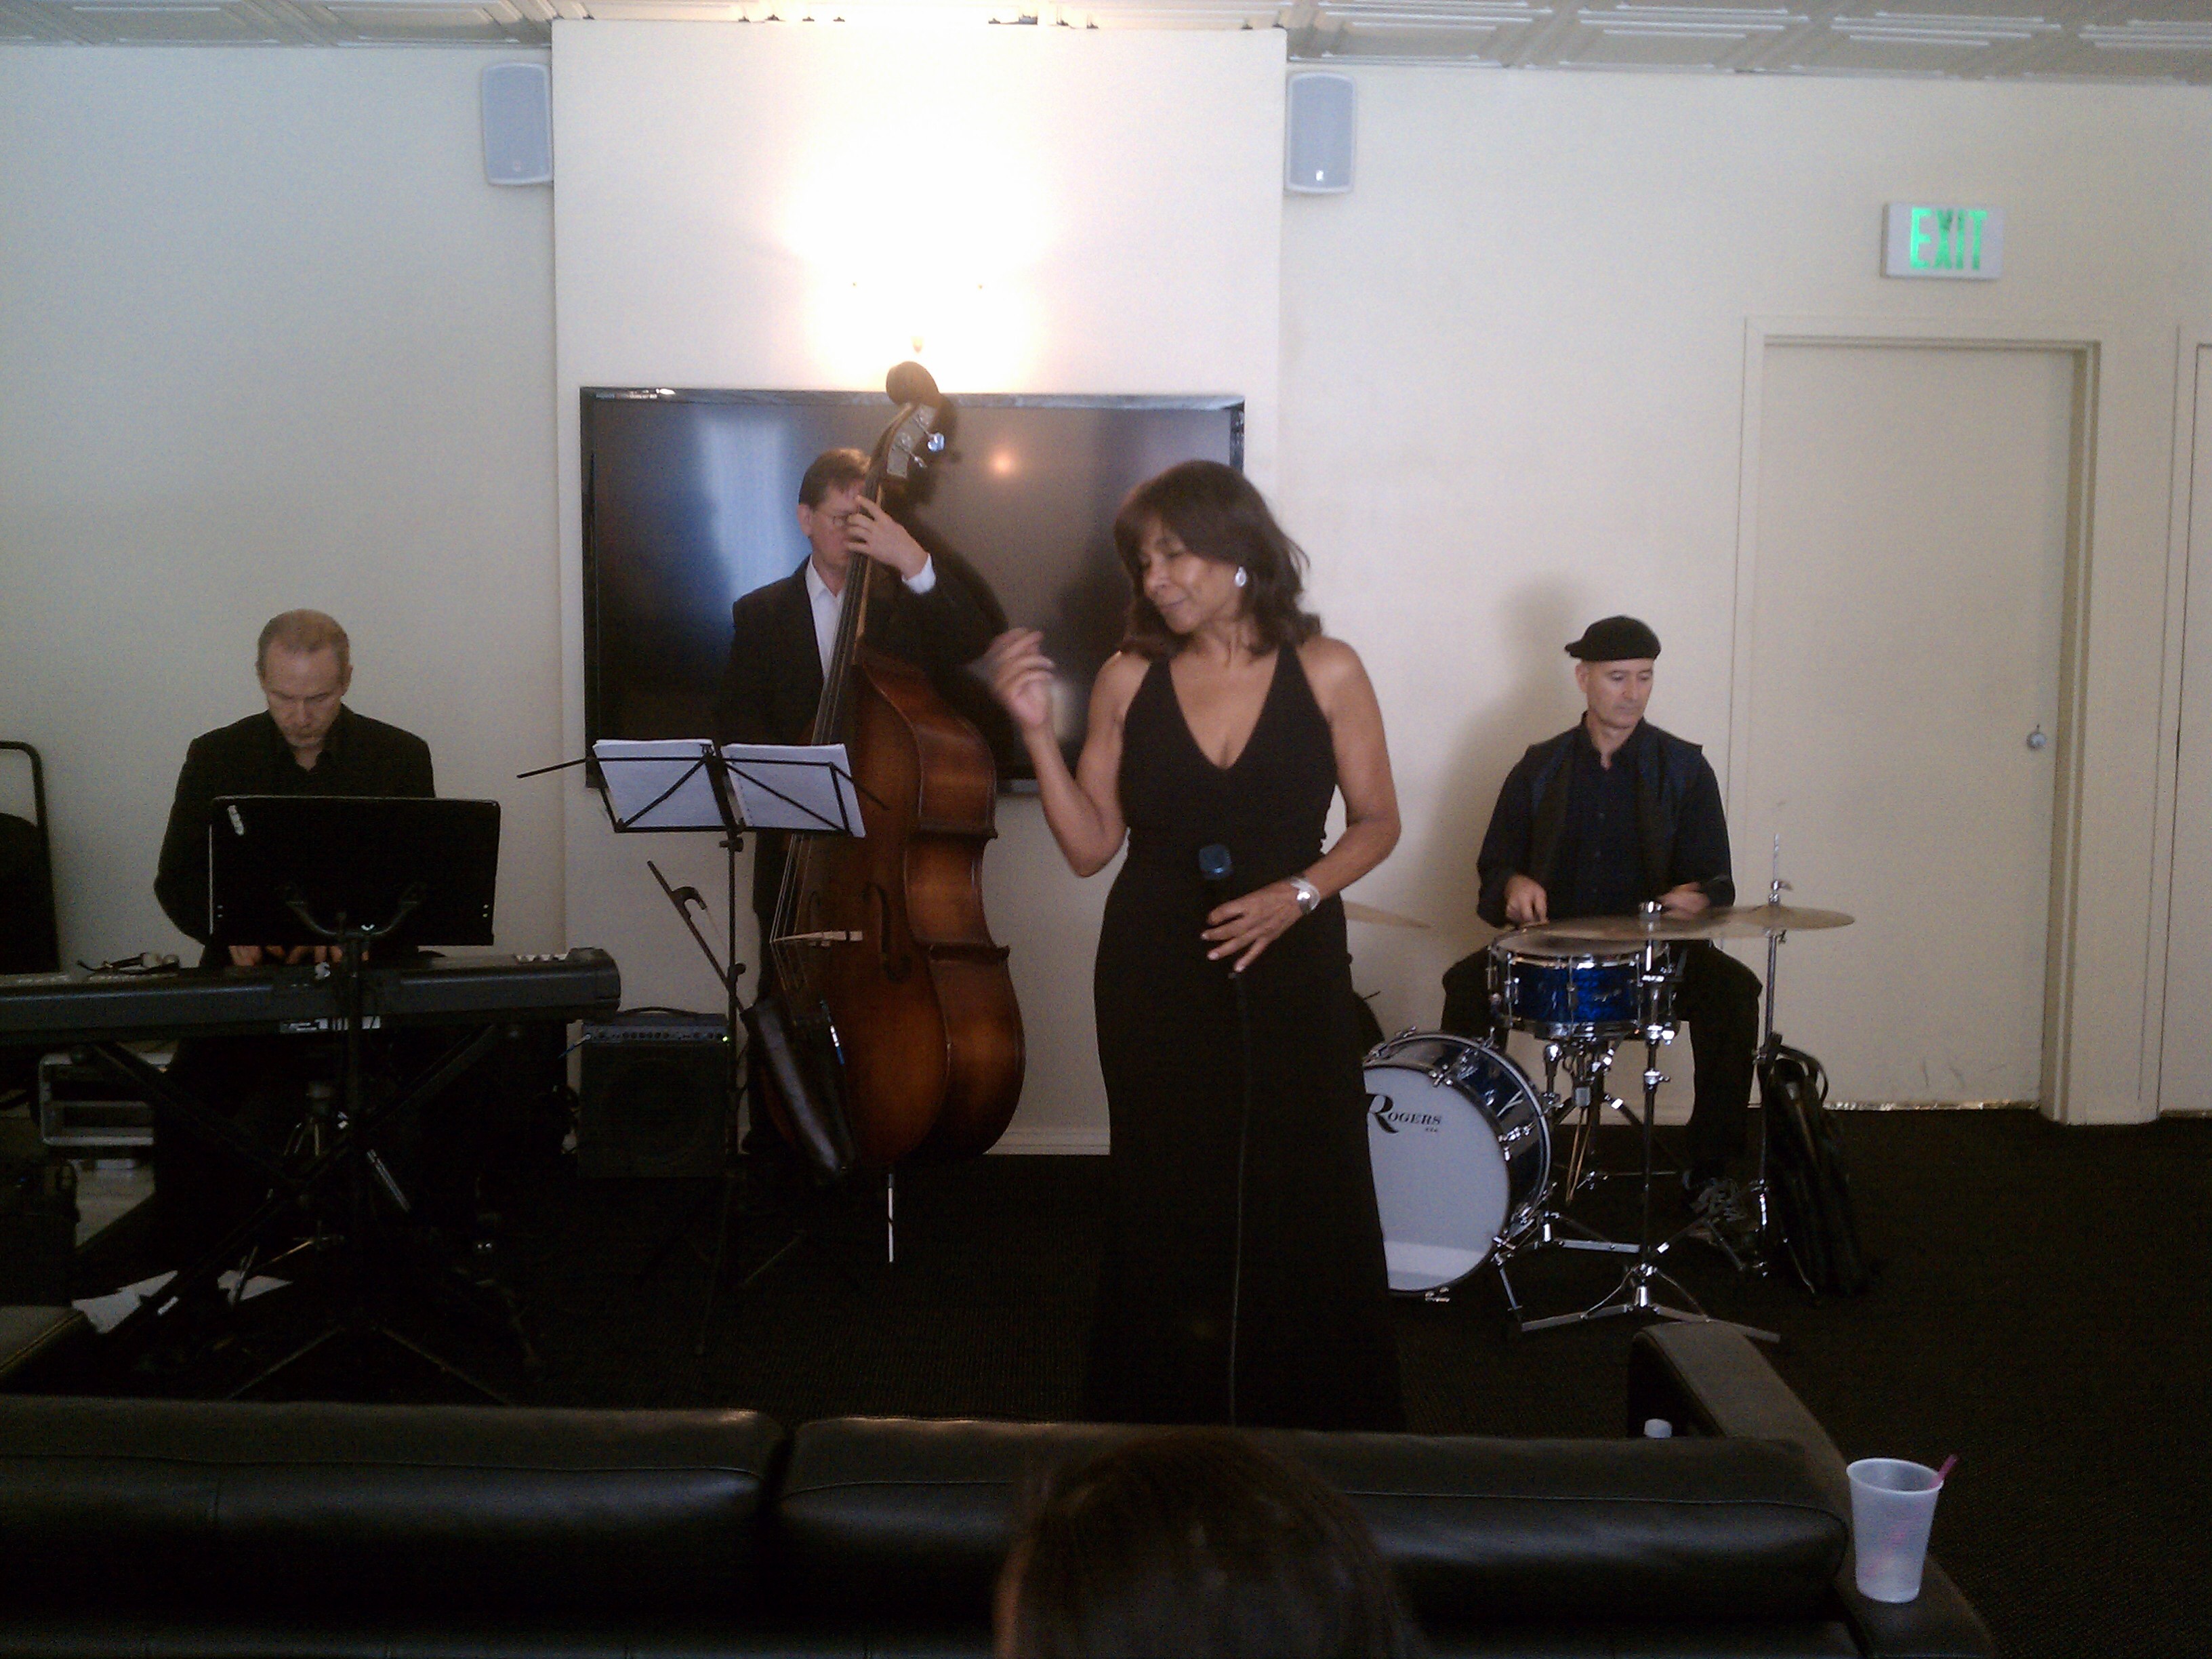 Jazz vocalist Debbie Joyce and her band wow the audience with their great music